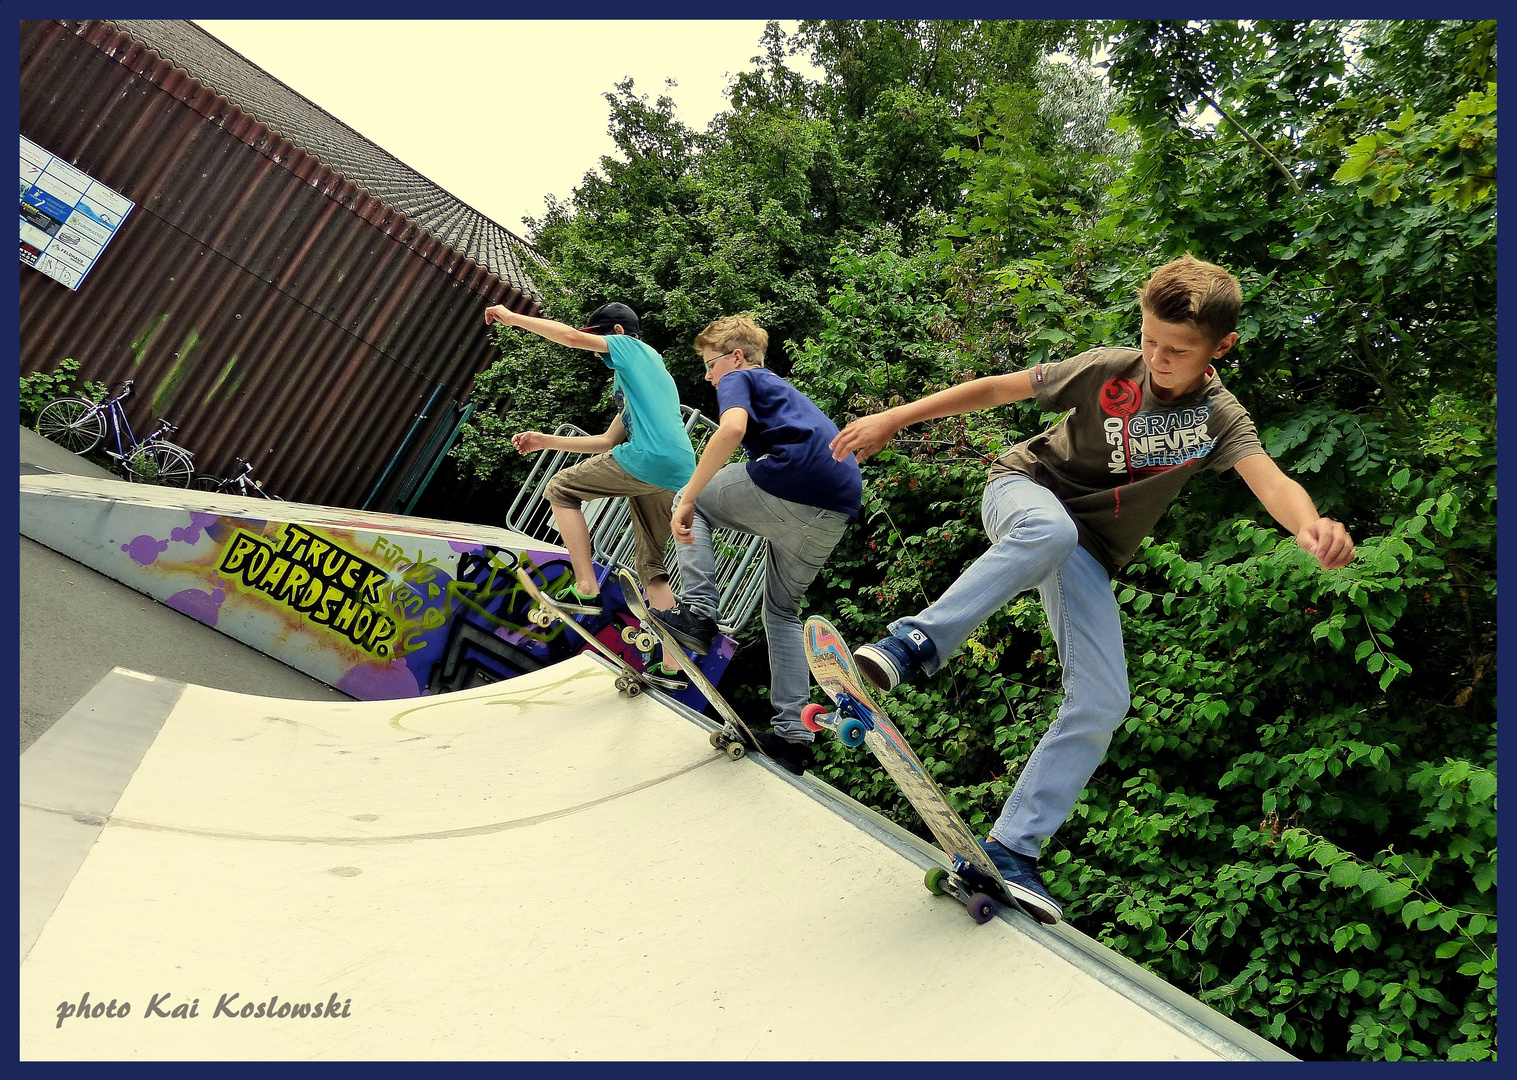 "Skatepark Soest-and Action"